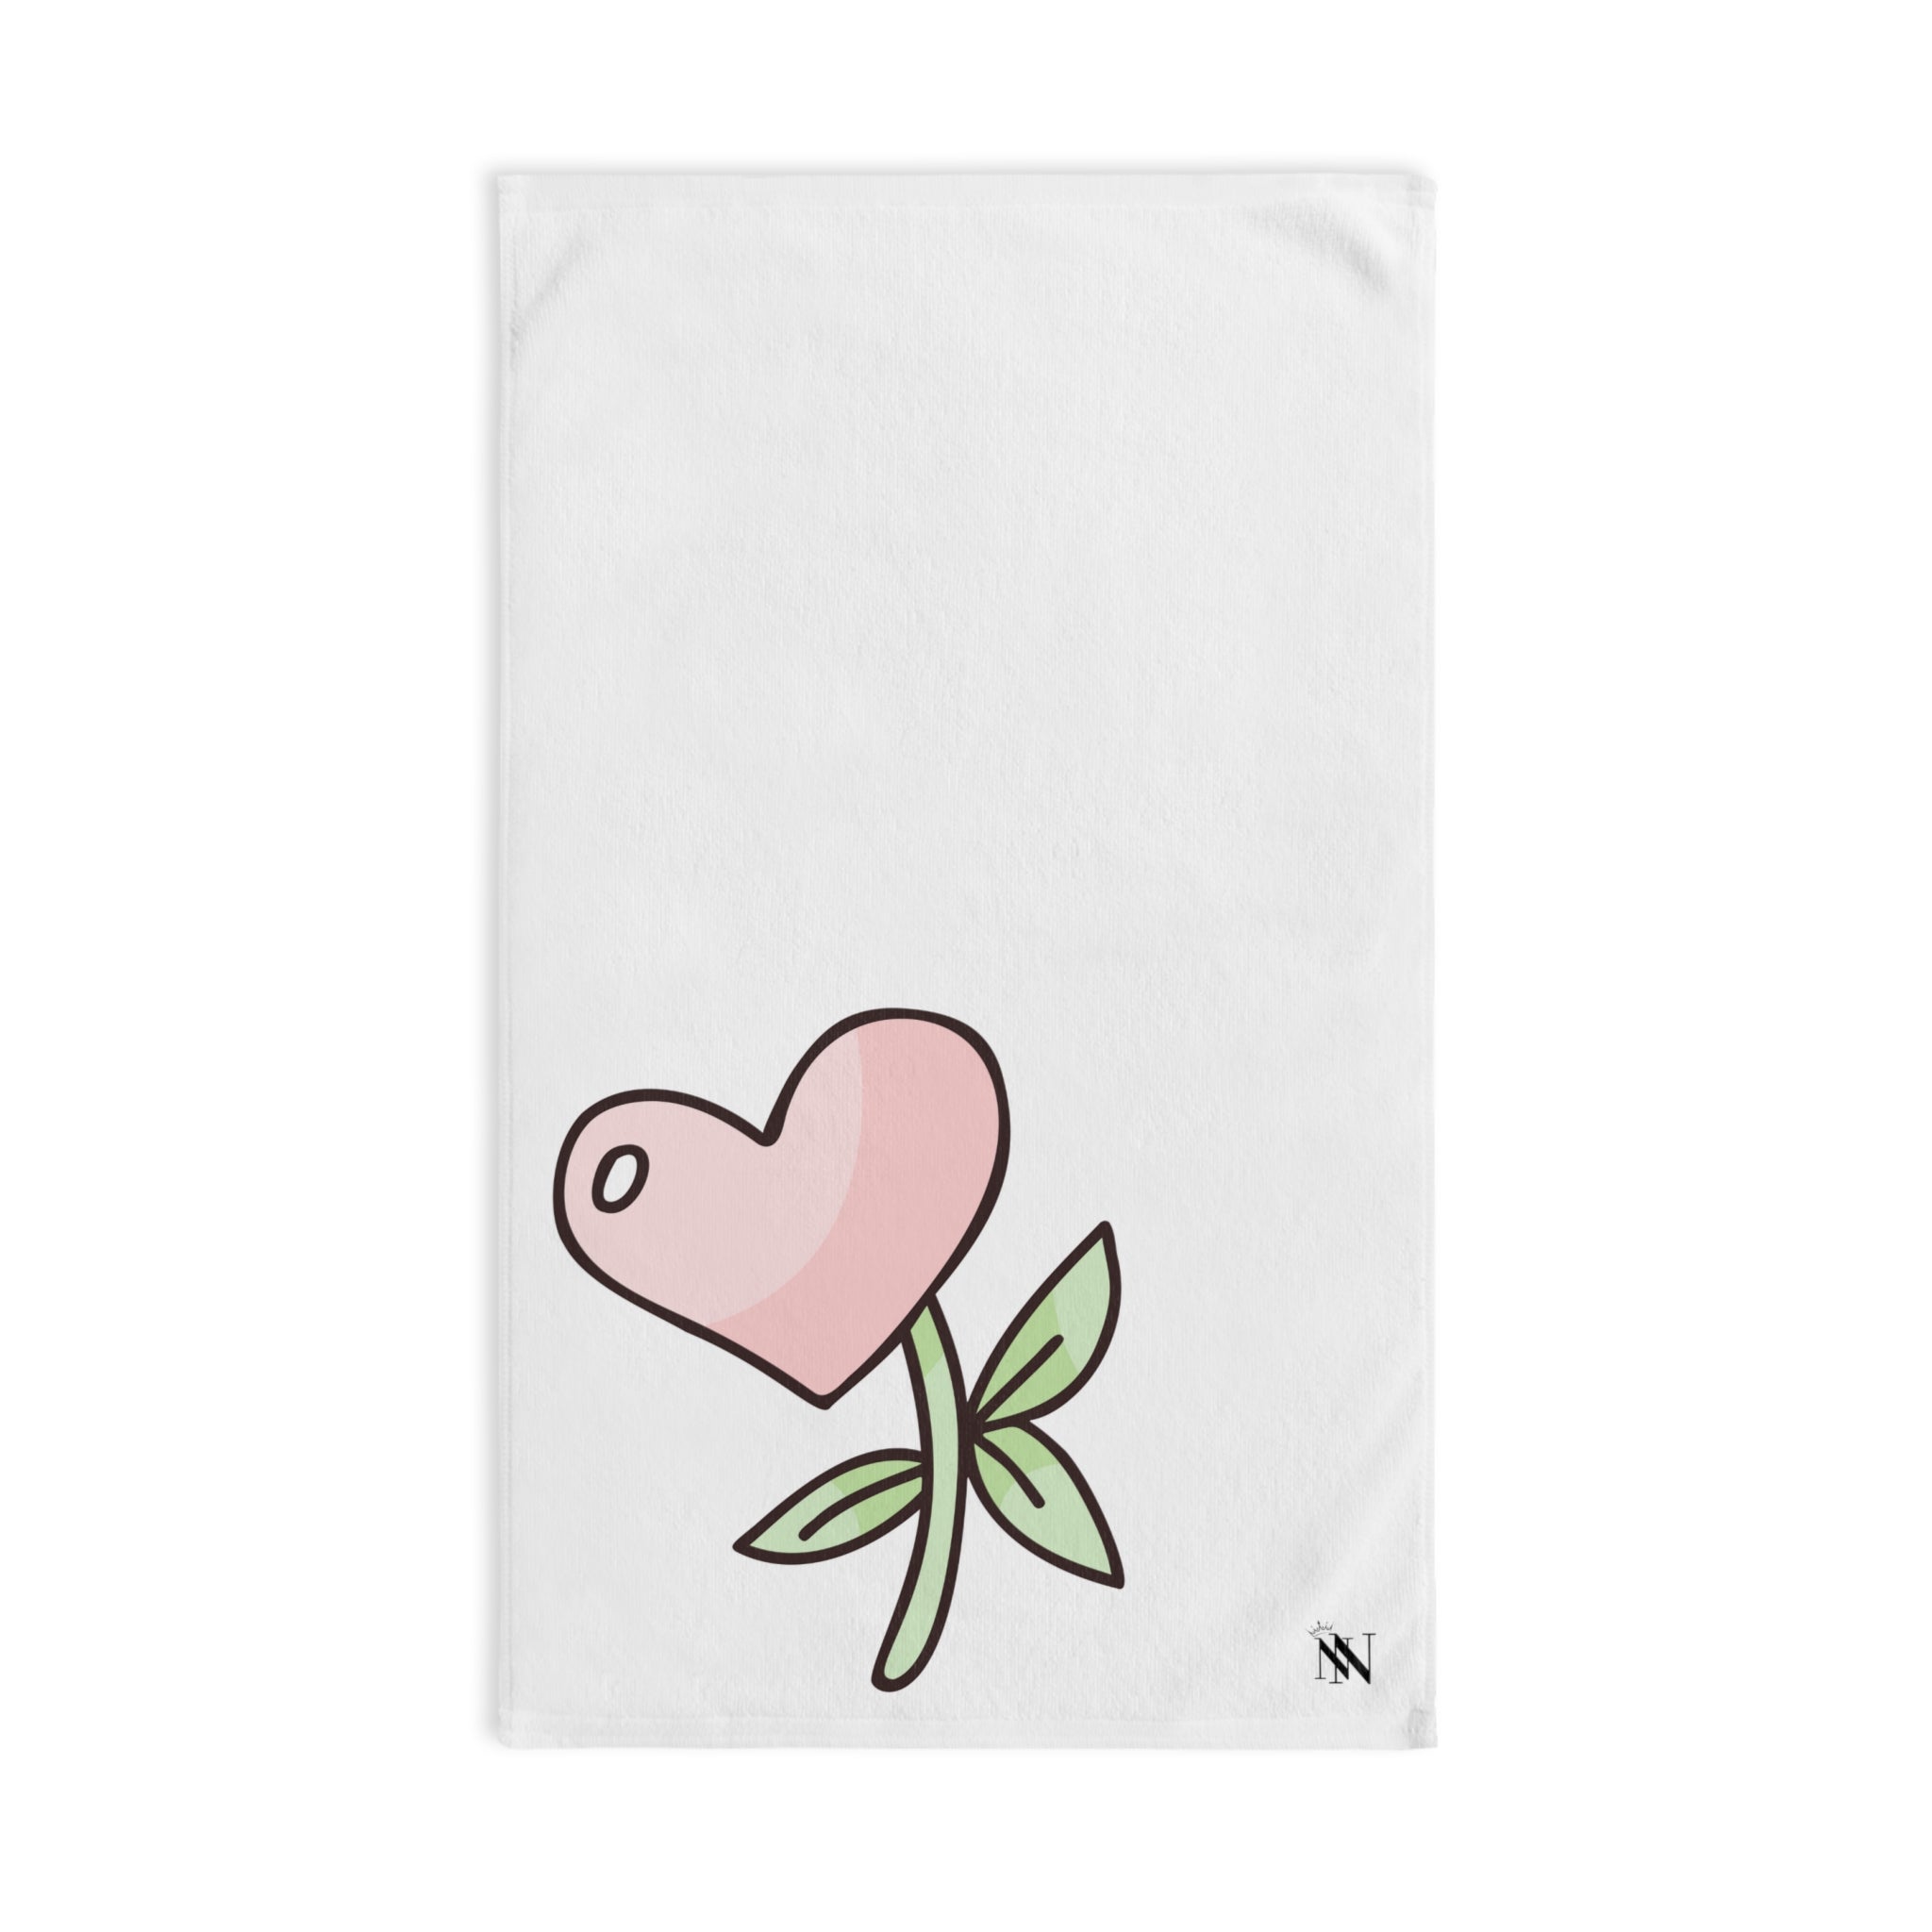 Flower Sticker HeartWhite | Funny Gifts for Men - Gifts for Him - Birthday Gifts for Men, Him, Her, Husband, Boyfriend, Girlfriend, New Couple Gifts, Fathers & Valentines Day Gifts, Christmas Gifts NECTAR NAPKINS